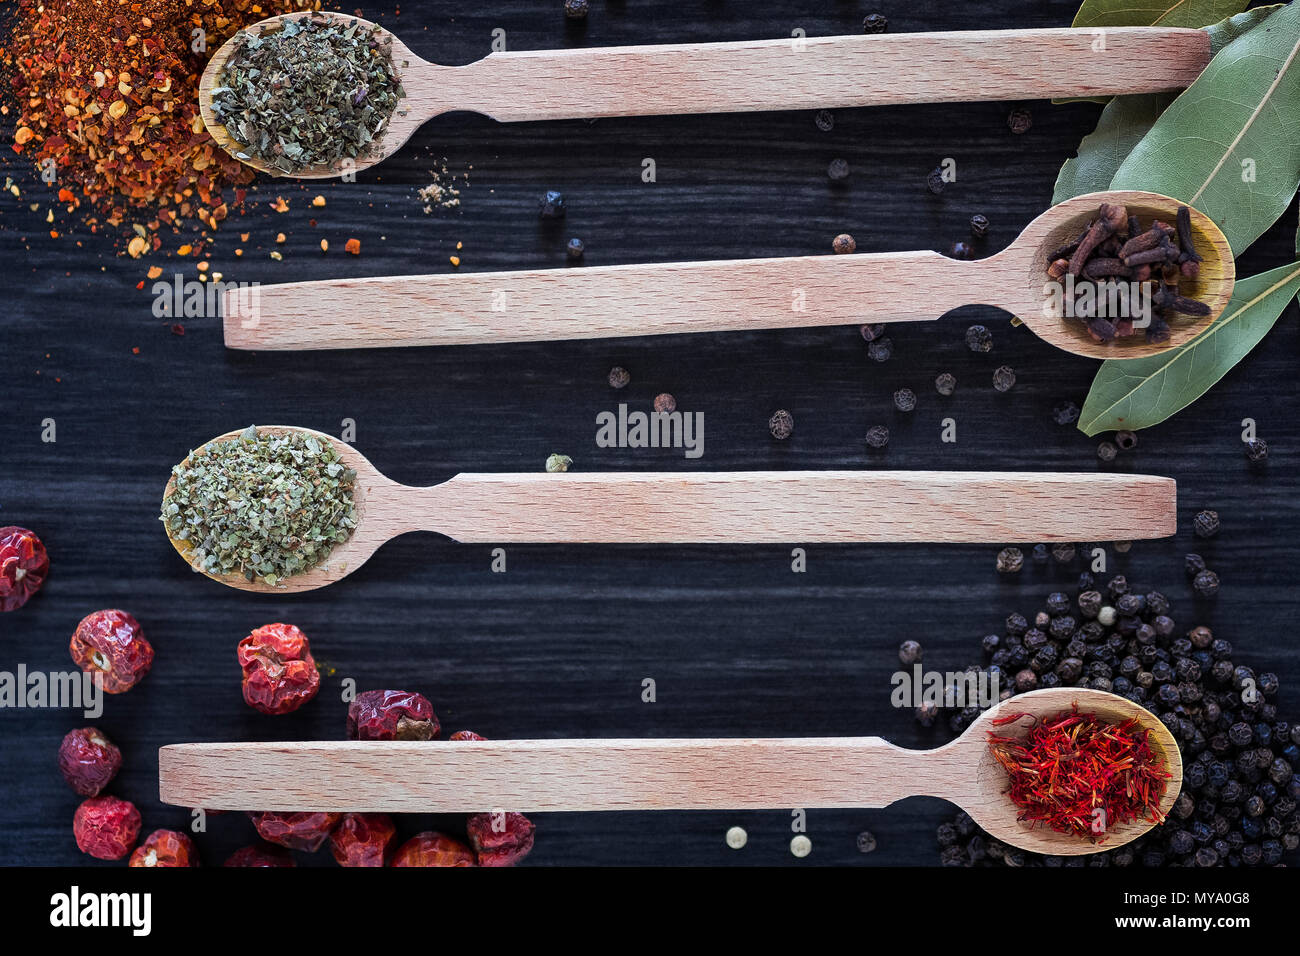 Four wooden spoons with various spices on dark wooden background Stock Photo